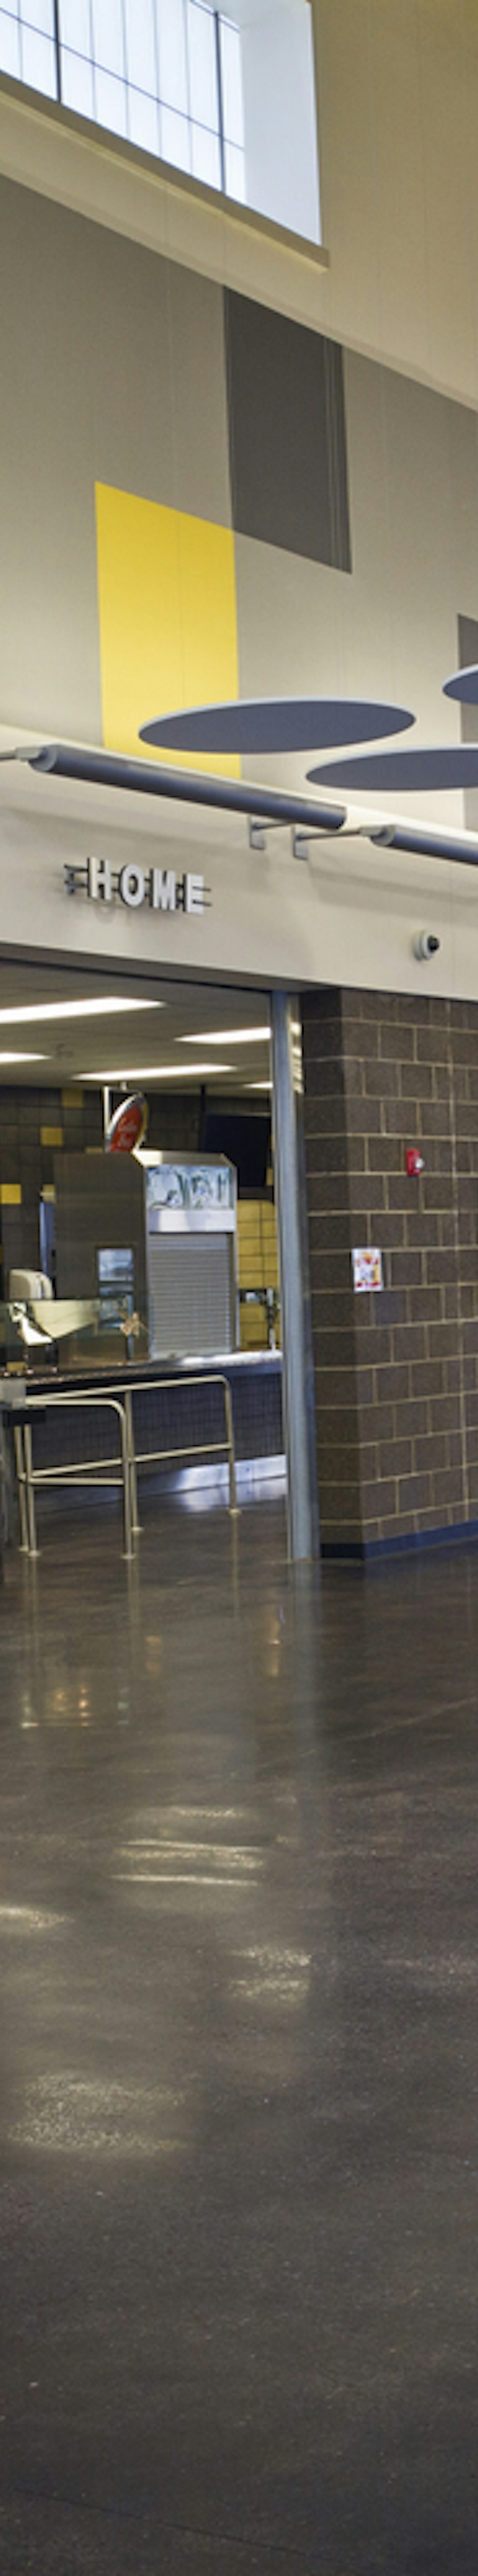                         Snyder High School Kitchen and Cafeteria
                    